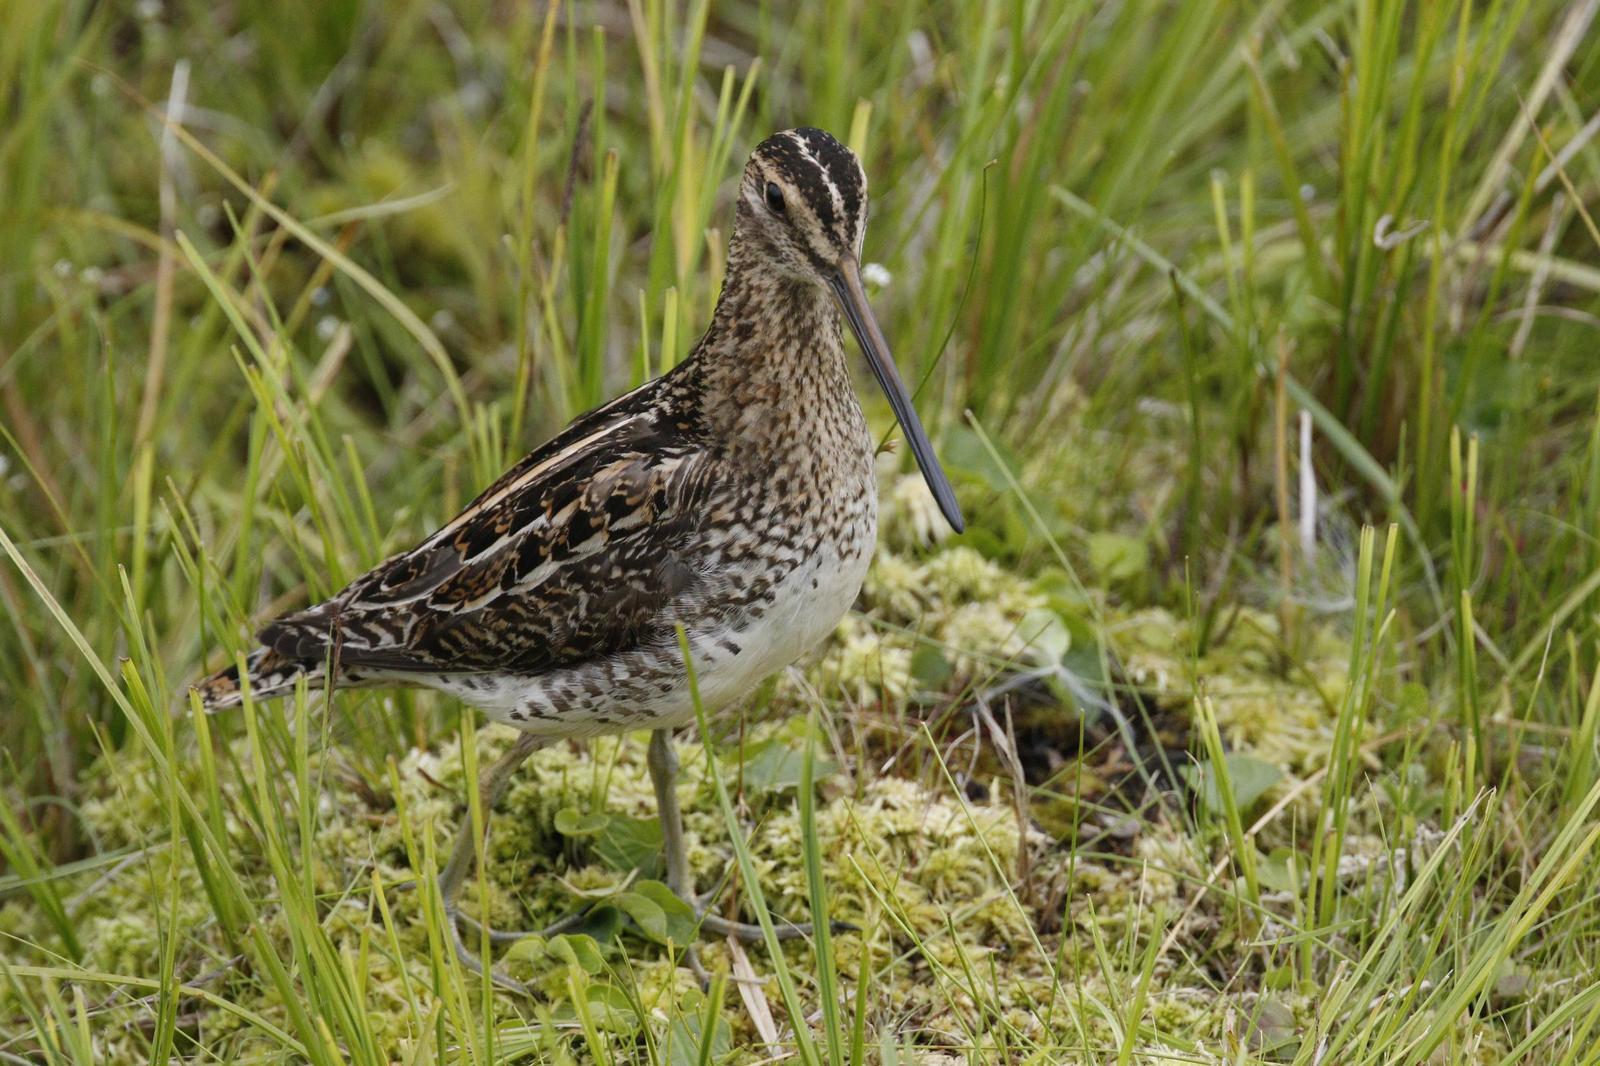 Common Snipe Photo by Emily Willoughby